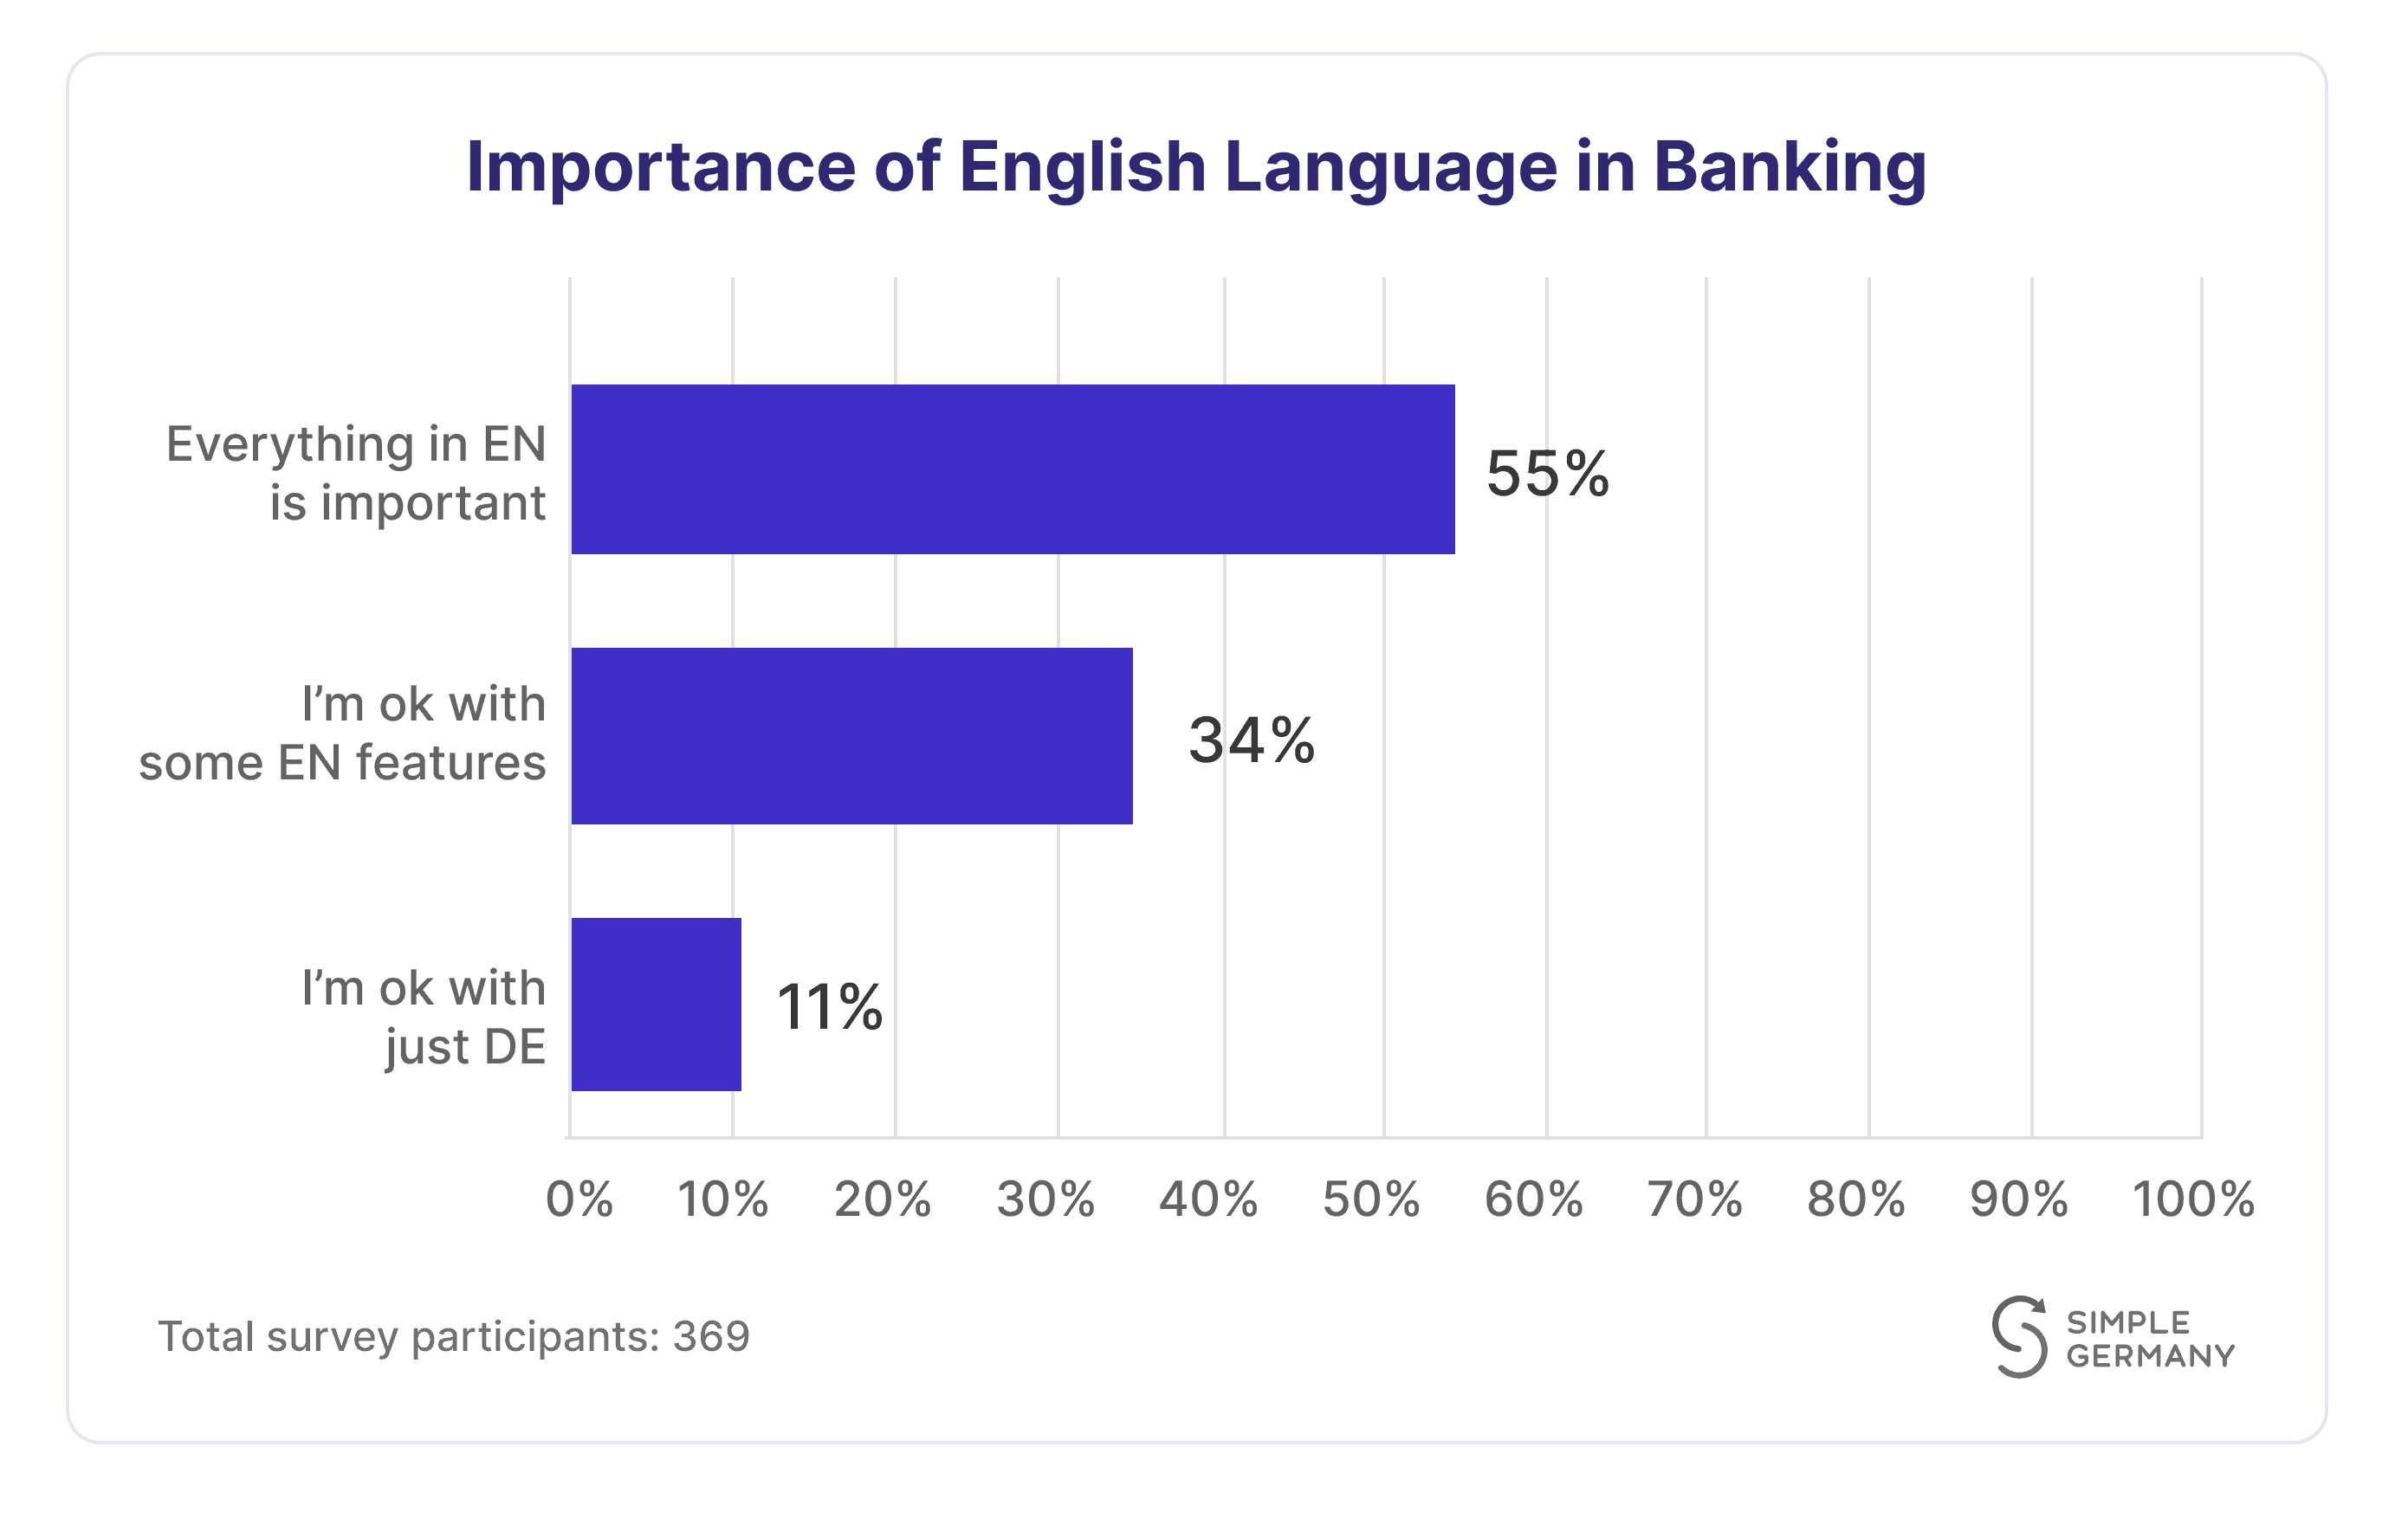 Bar chart showing the importance of English language in Banking